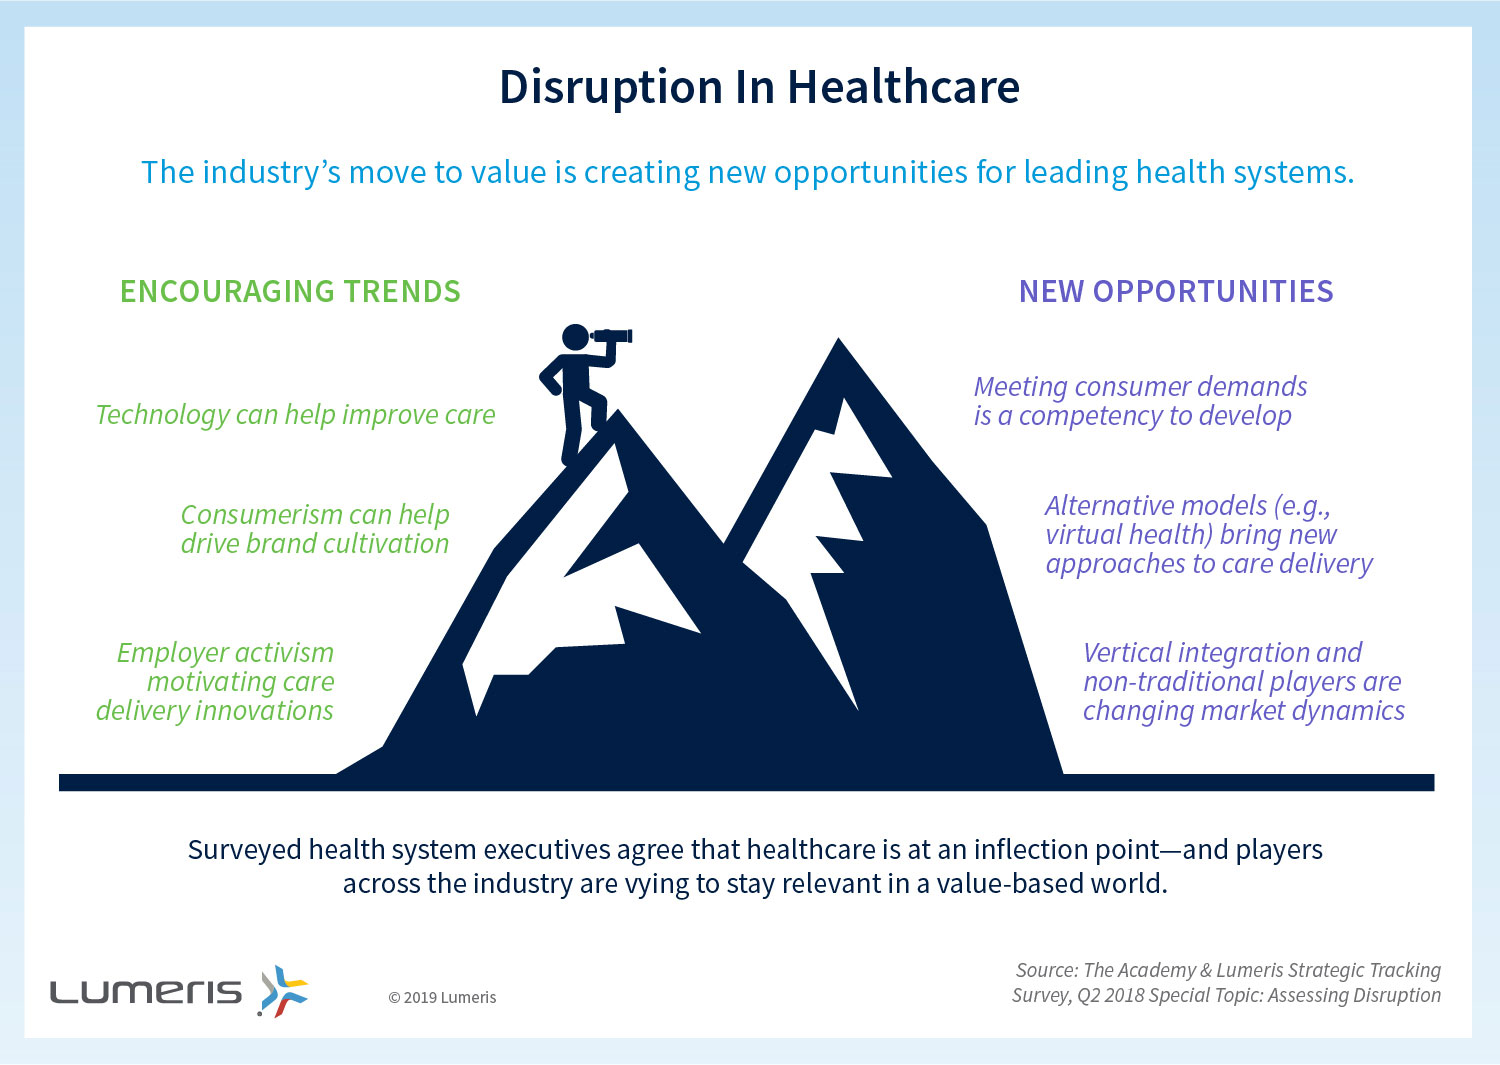 Disruption In Healthcare Offers New Opportunities For Health